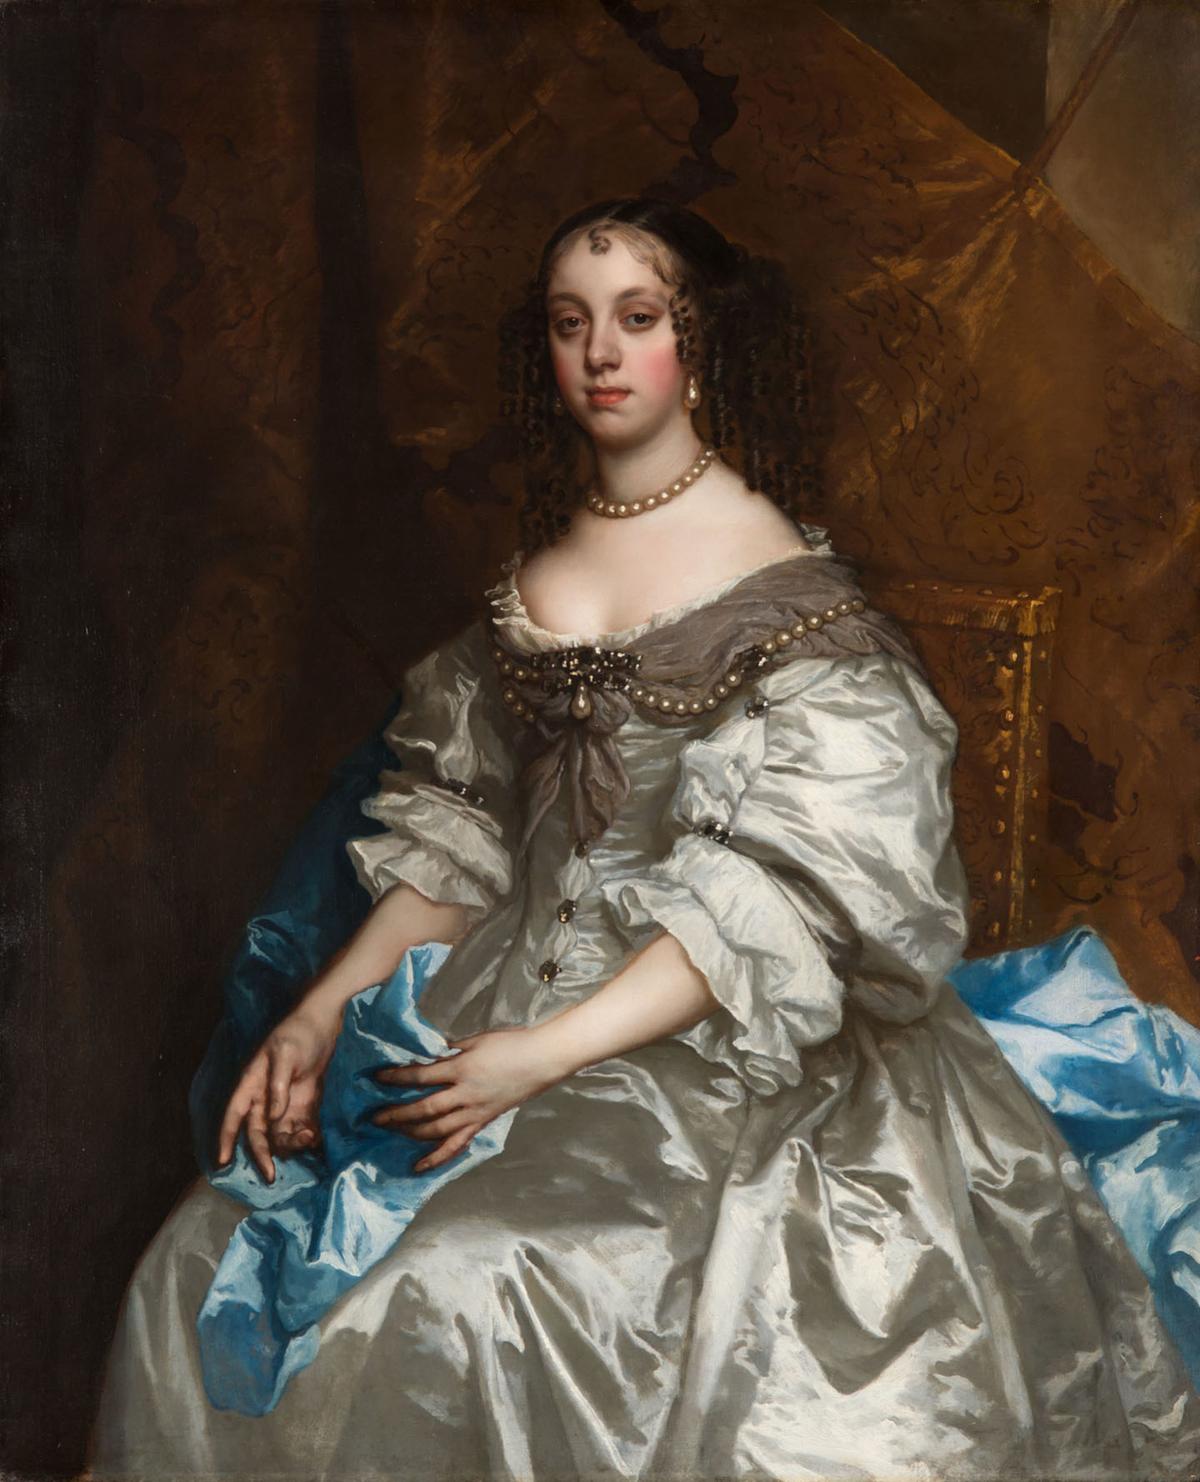 Catherine of Braganza, from 1663 until 1665, by Peter Lely. Oil on canvas; 49 3/10 inches by 40 2/5 inches. Royal Collection, UK. (Public Domain)